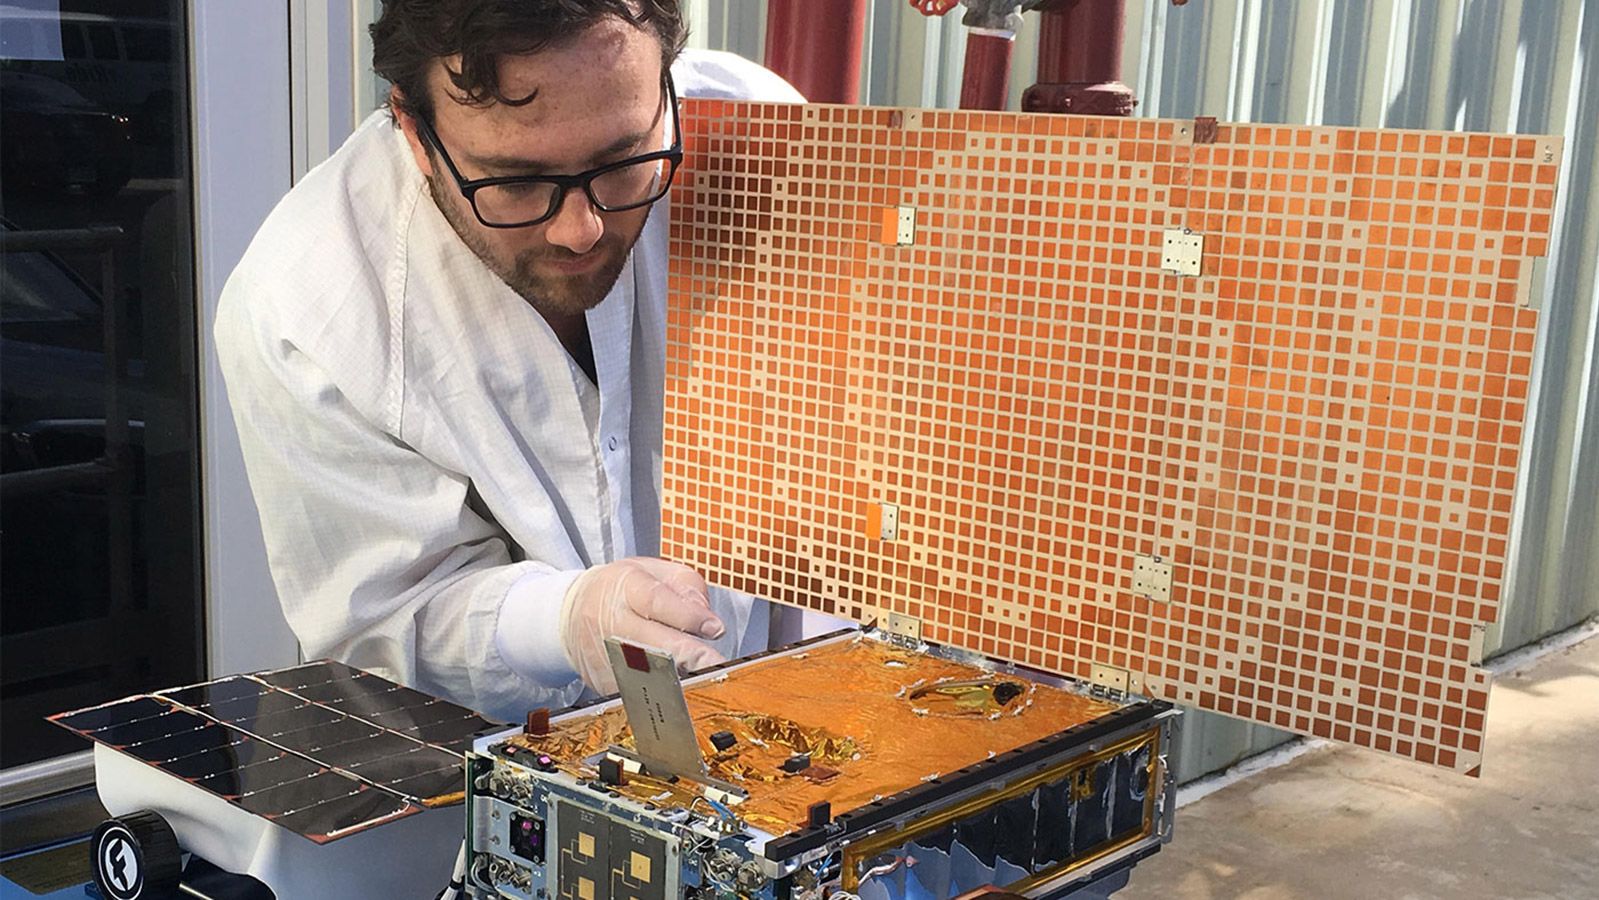 Engineer Joel Steinkraus uses sunlight to test the solar arrays on one of the MarCO spacecraft.